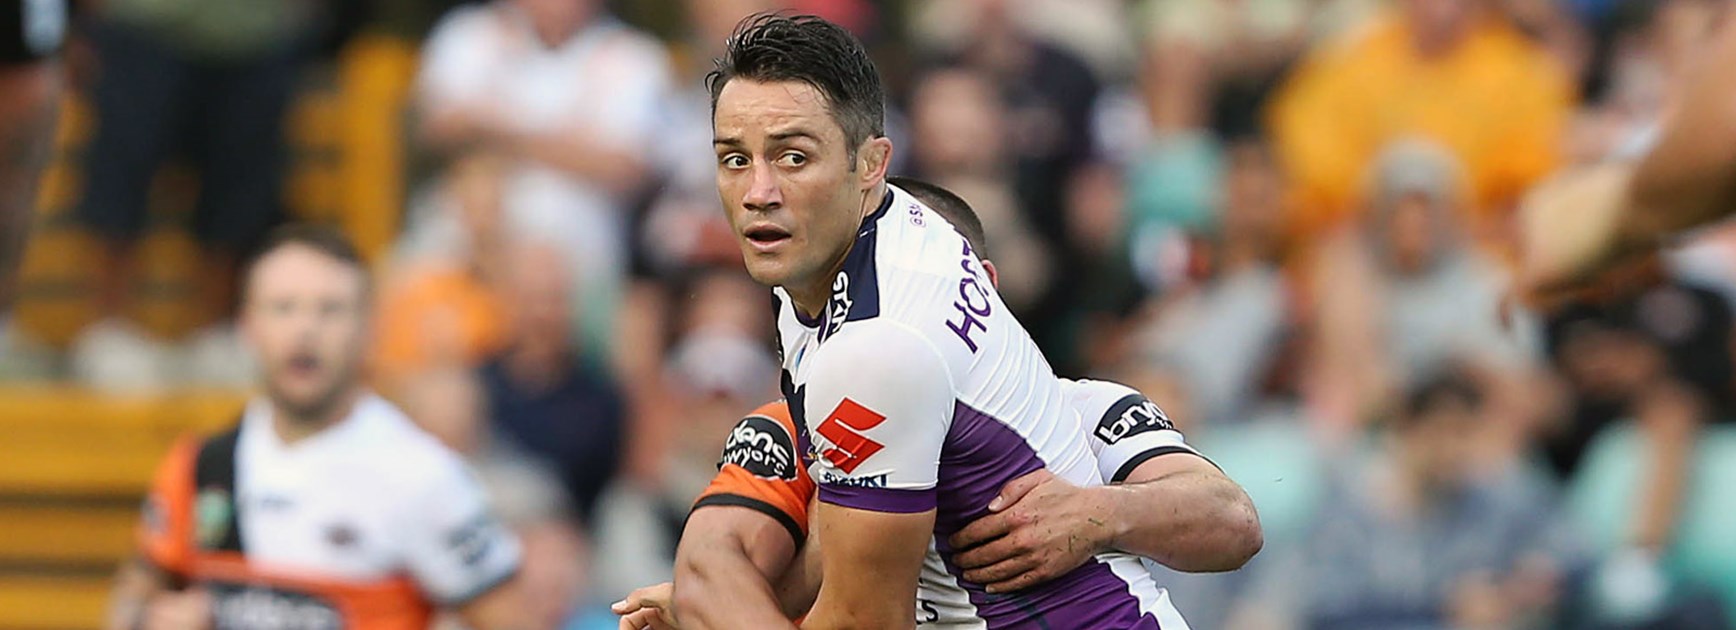 Storm halfback Cooper Cronk against the Tigers in Round 7.